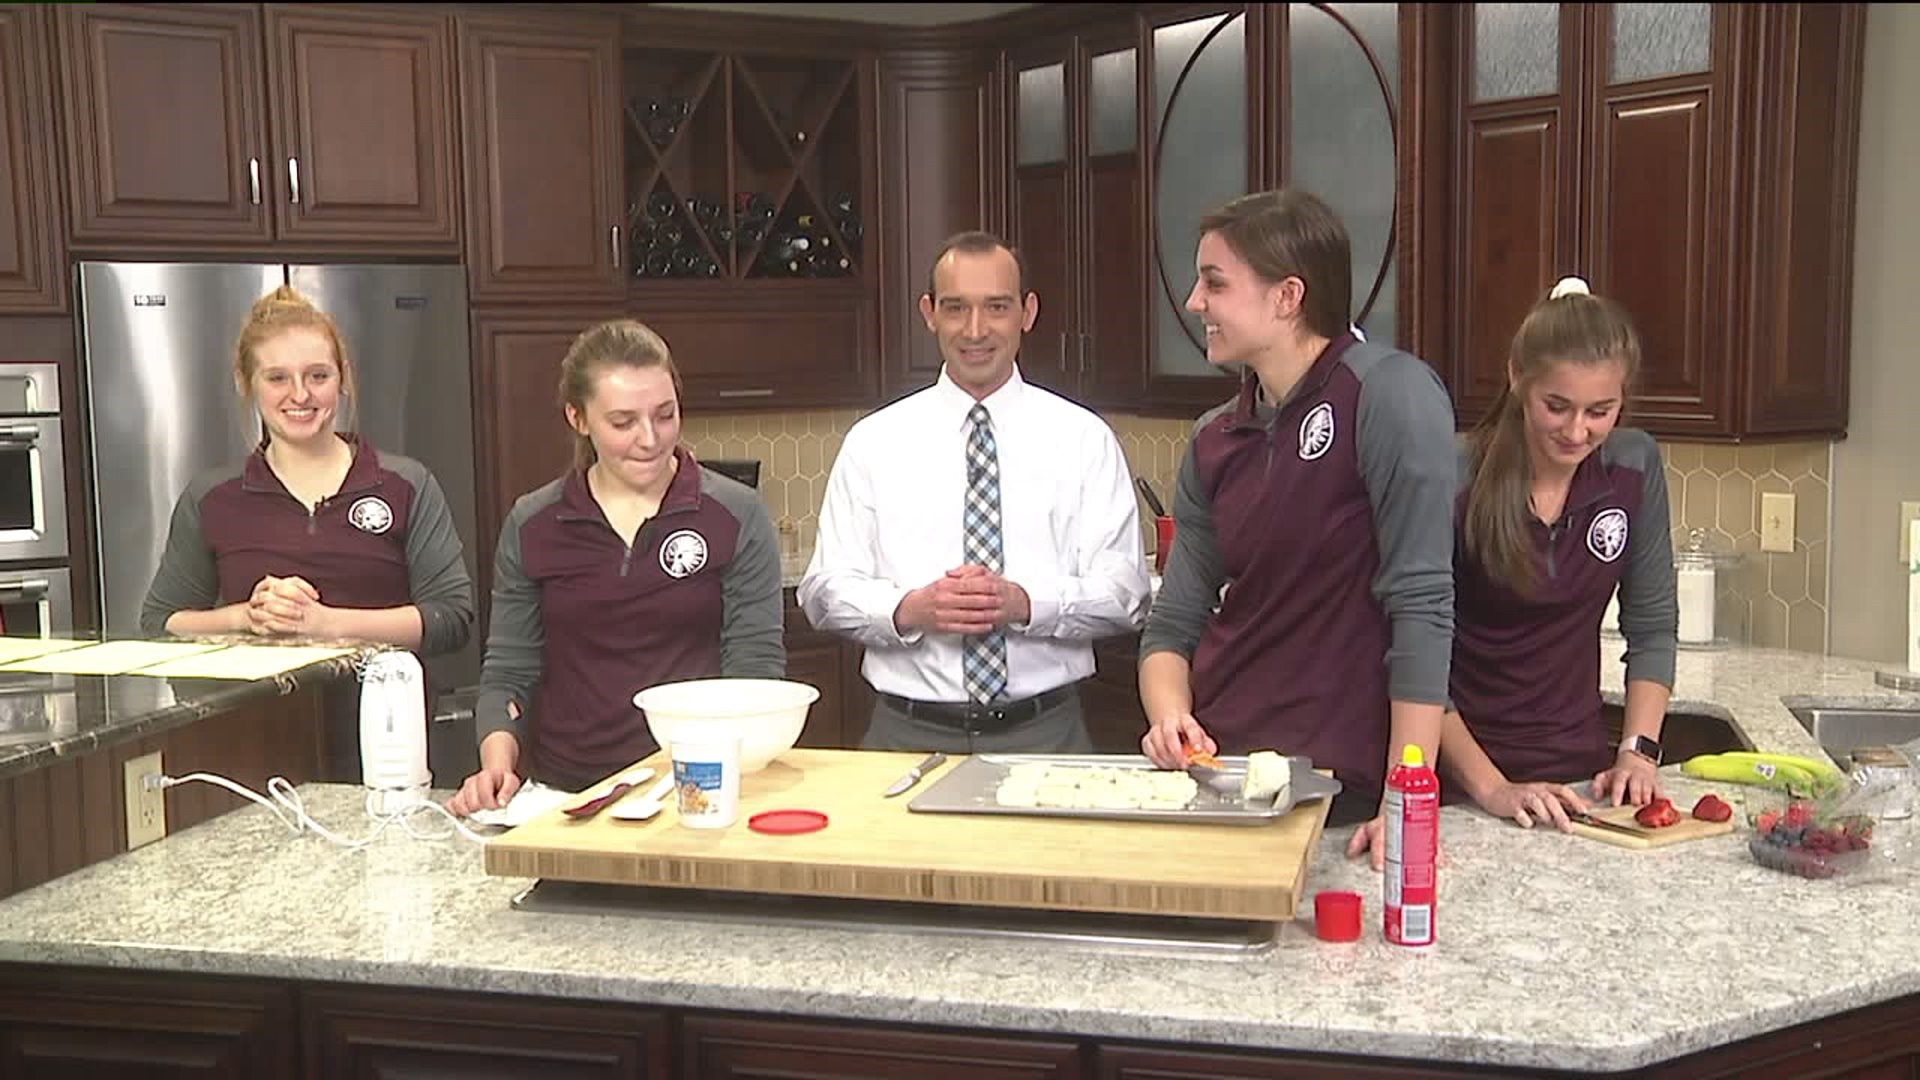 THE SCORE SUNDAY - Cooking With Bravettes